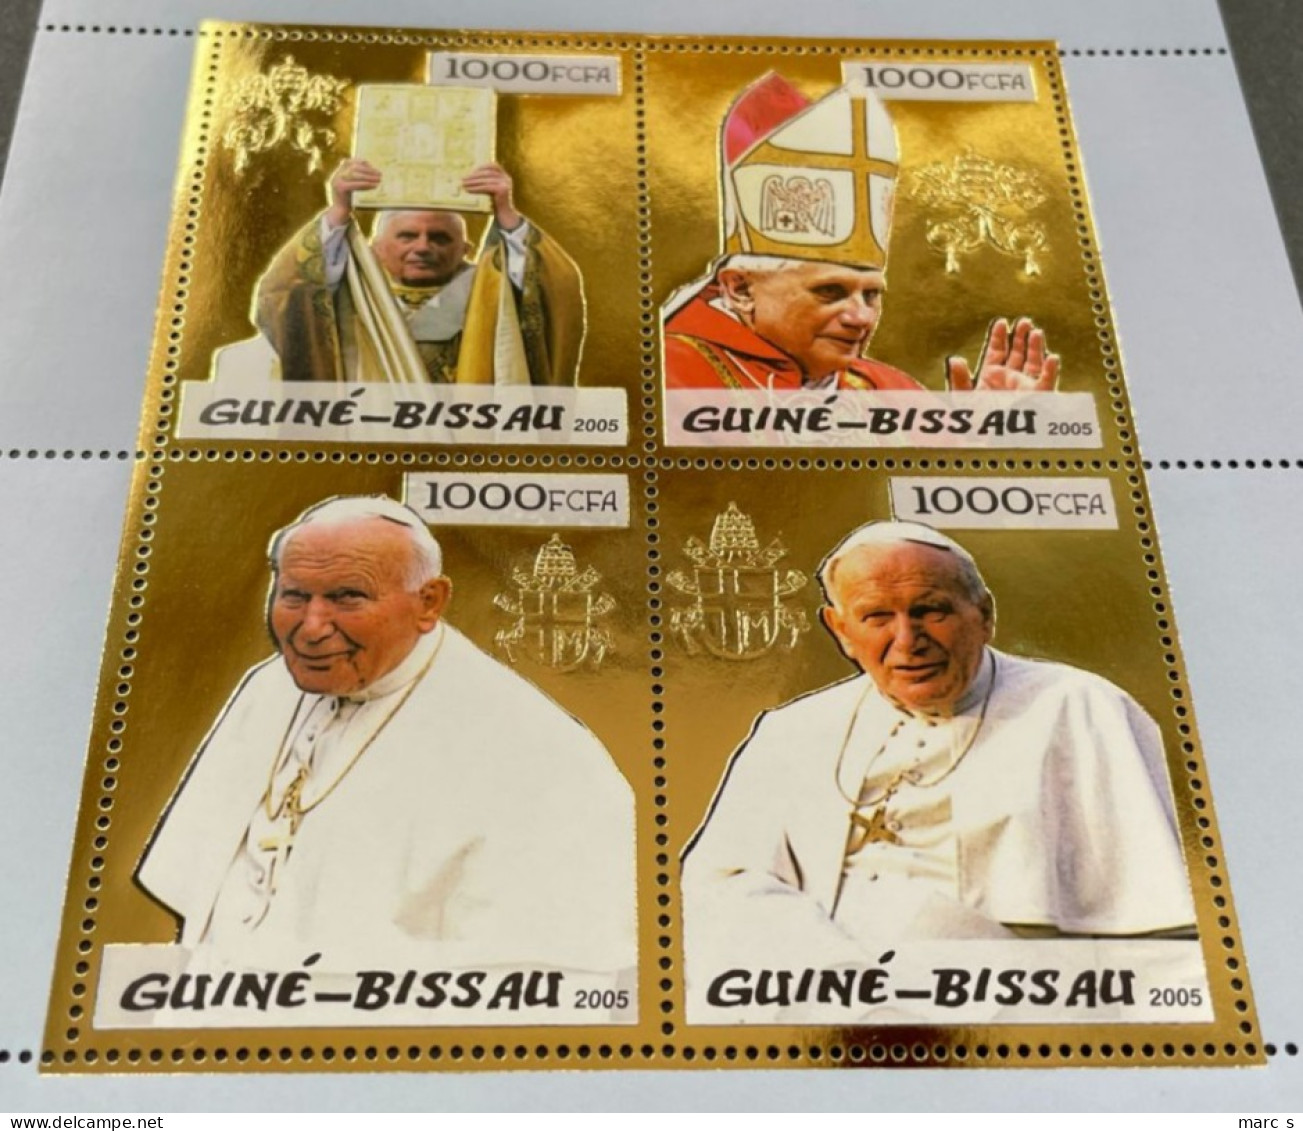 GUINEE BISSAU 2005 - NEUF**/MNH - LUXE - Série Complète GOLD OR + SILBER ARGENT - RARE - PAPE JEAN PAUL BENOIT - Guinea-Bissau